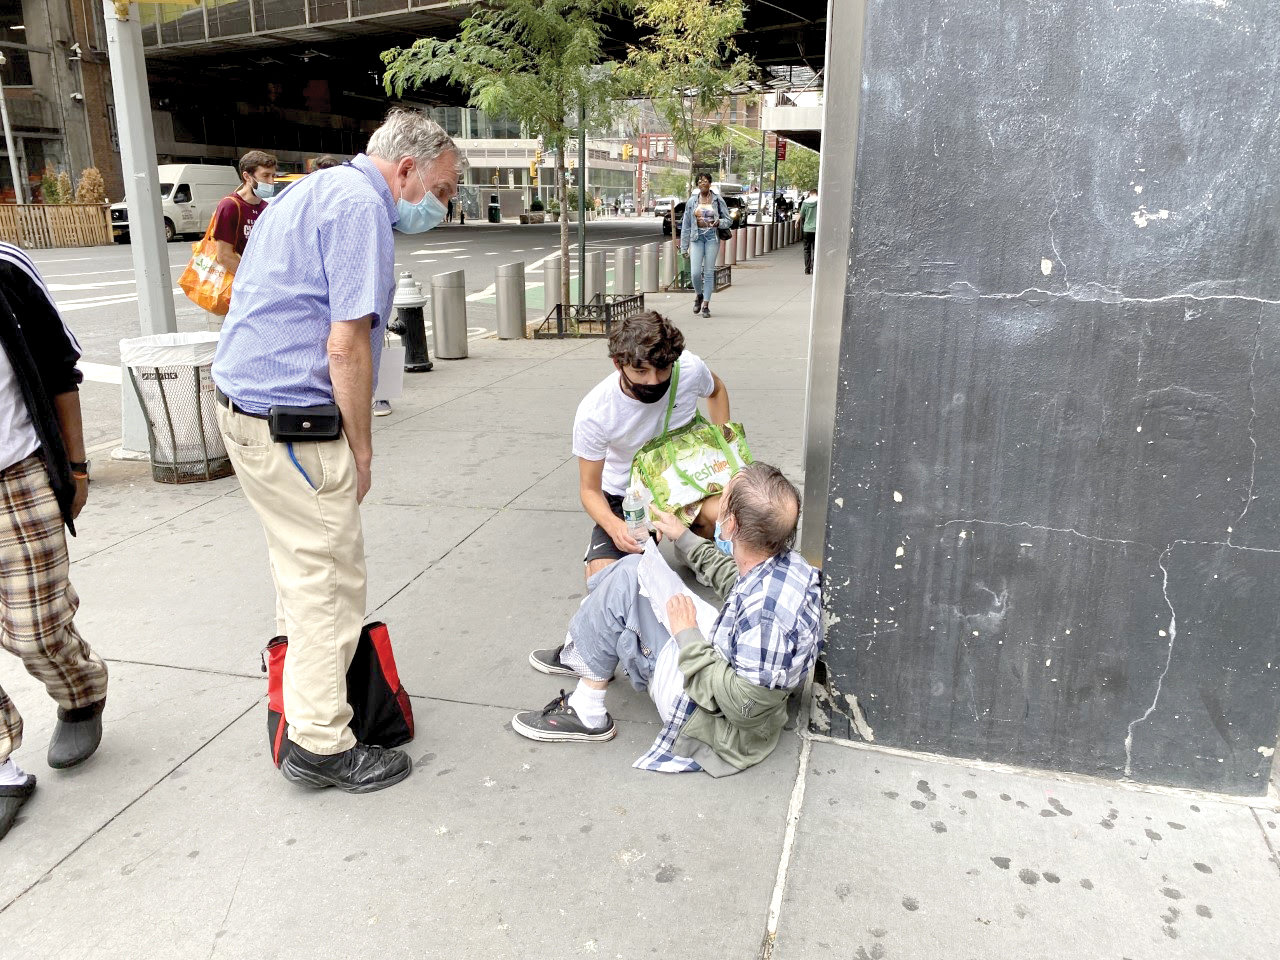 Ed Greene, left, co-pastoral director of LAMP, and NYU freshman Luis Gonzalez provide assistance to a man in Manhattan.